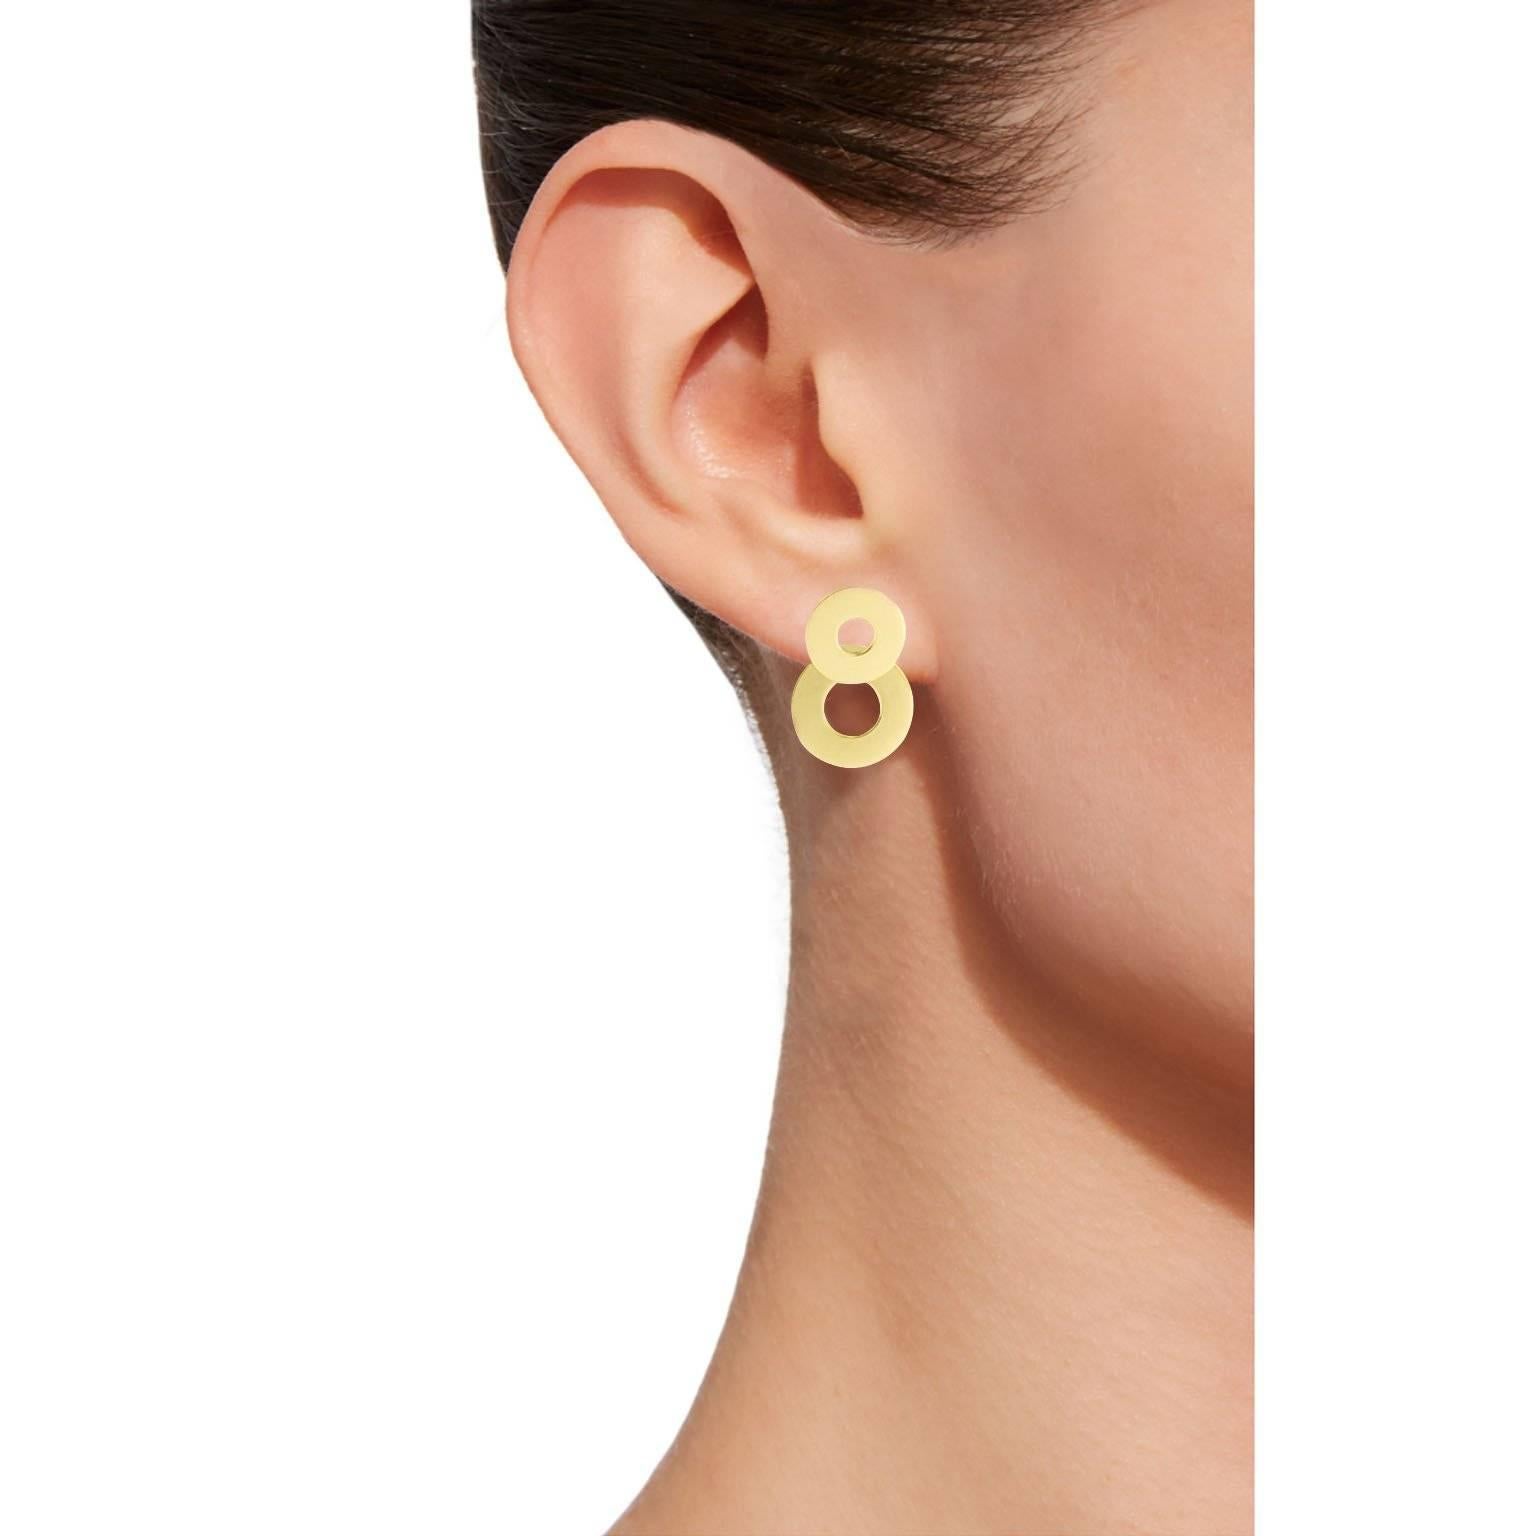 Jona design collection, hand crafted in Italy, 18 karat yellow gold clip-on pendant earrings consisting of two partially overlapping pierced disks.
All Jona jewelry is new and has never been previously owned or worn. Each item will arrive at your